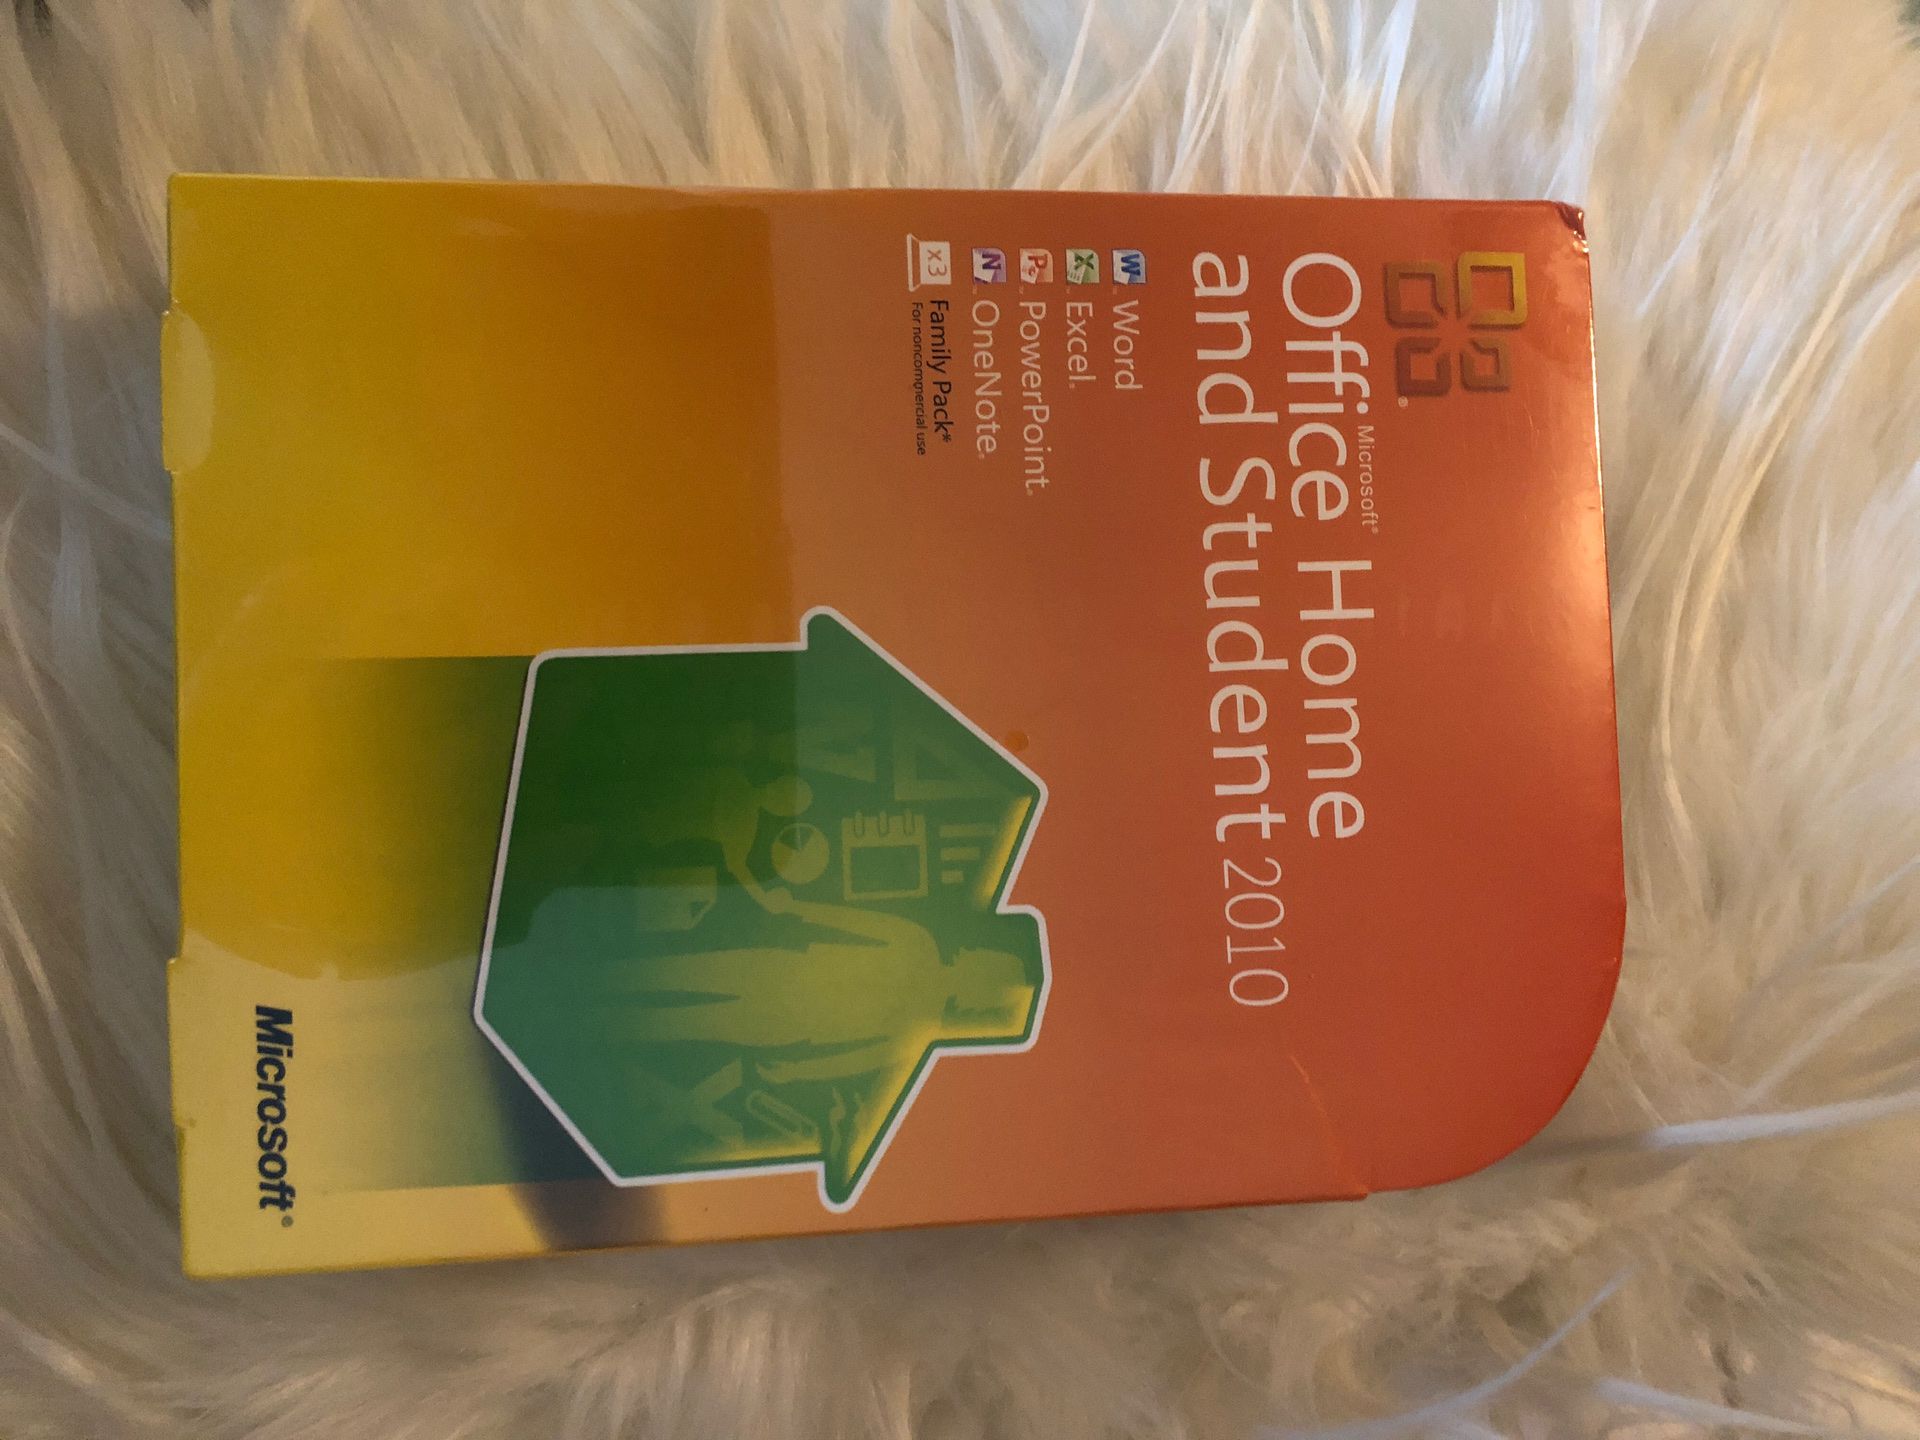 Microsoft office home and student 2010